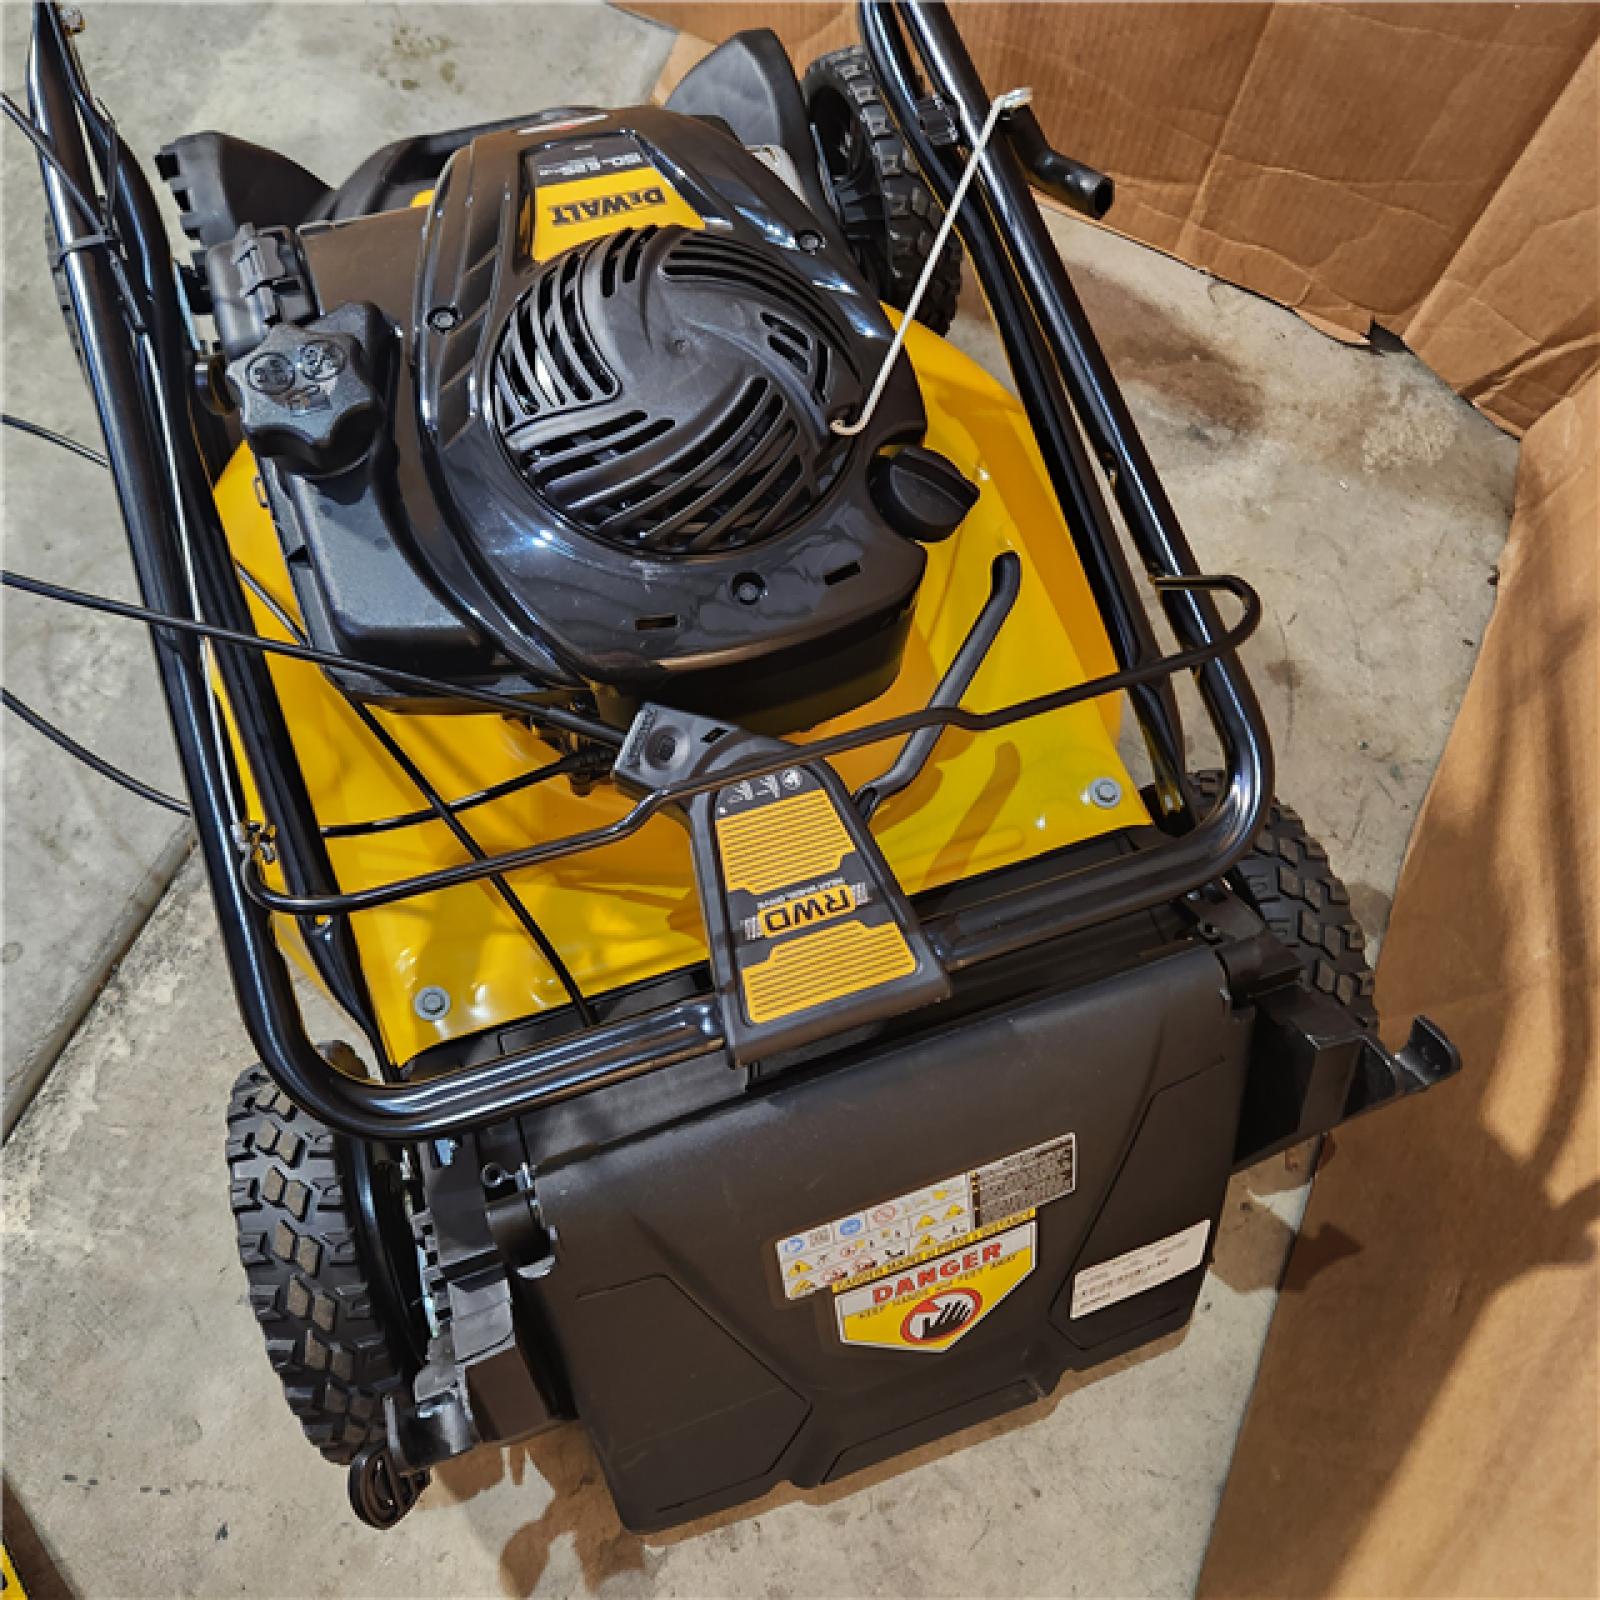 Houston location- AS-IS DeWalt 163cc 21  Dual Lever Self Propelled Lawn Mower - Appears IN NEW Conditon